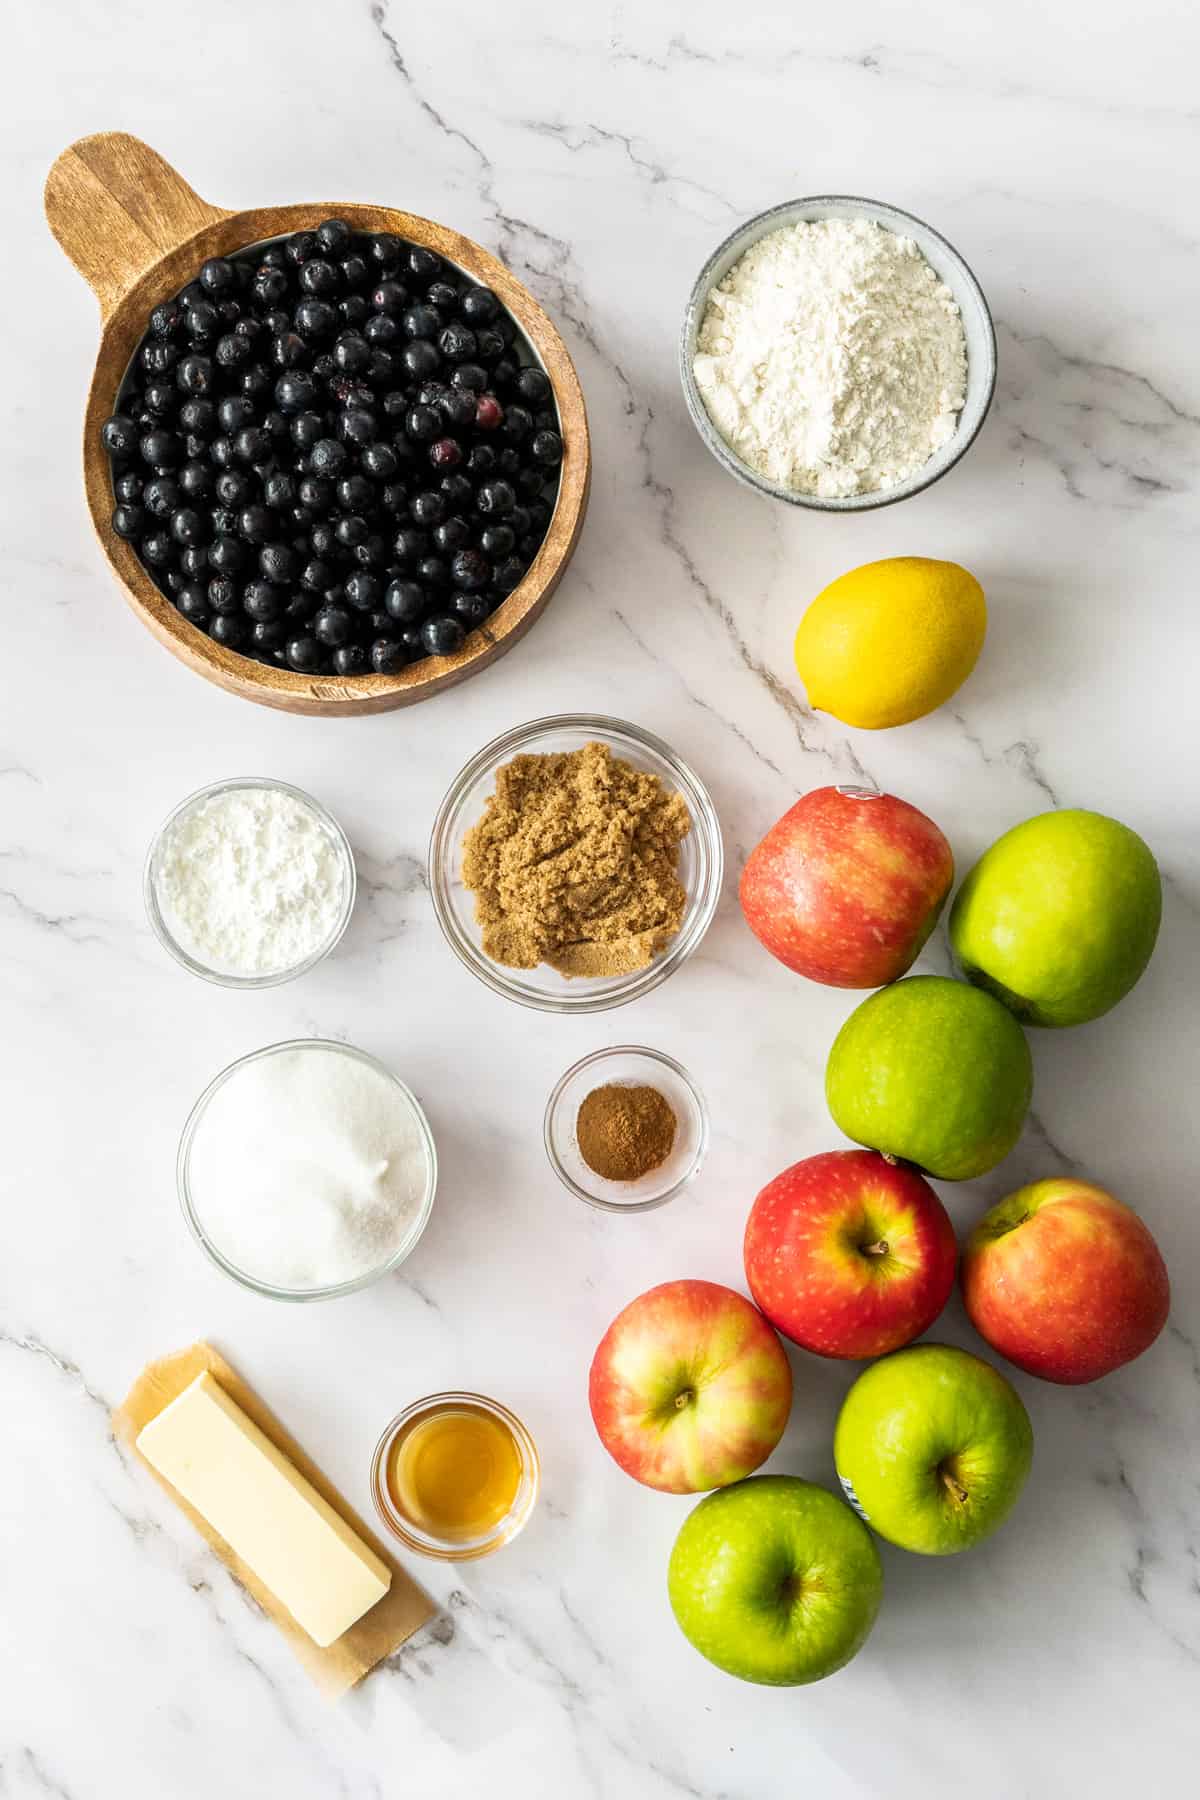 apples, blueberries, butter, flour, and other ingredients on a white board.